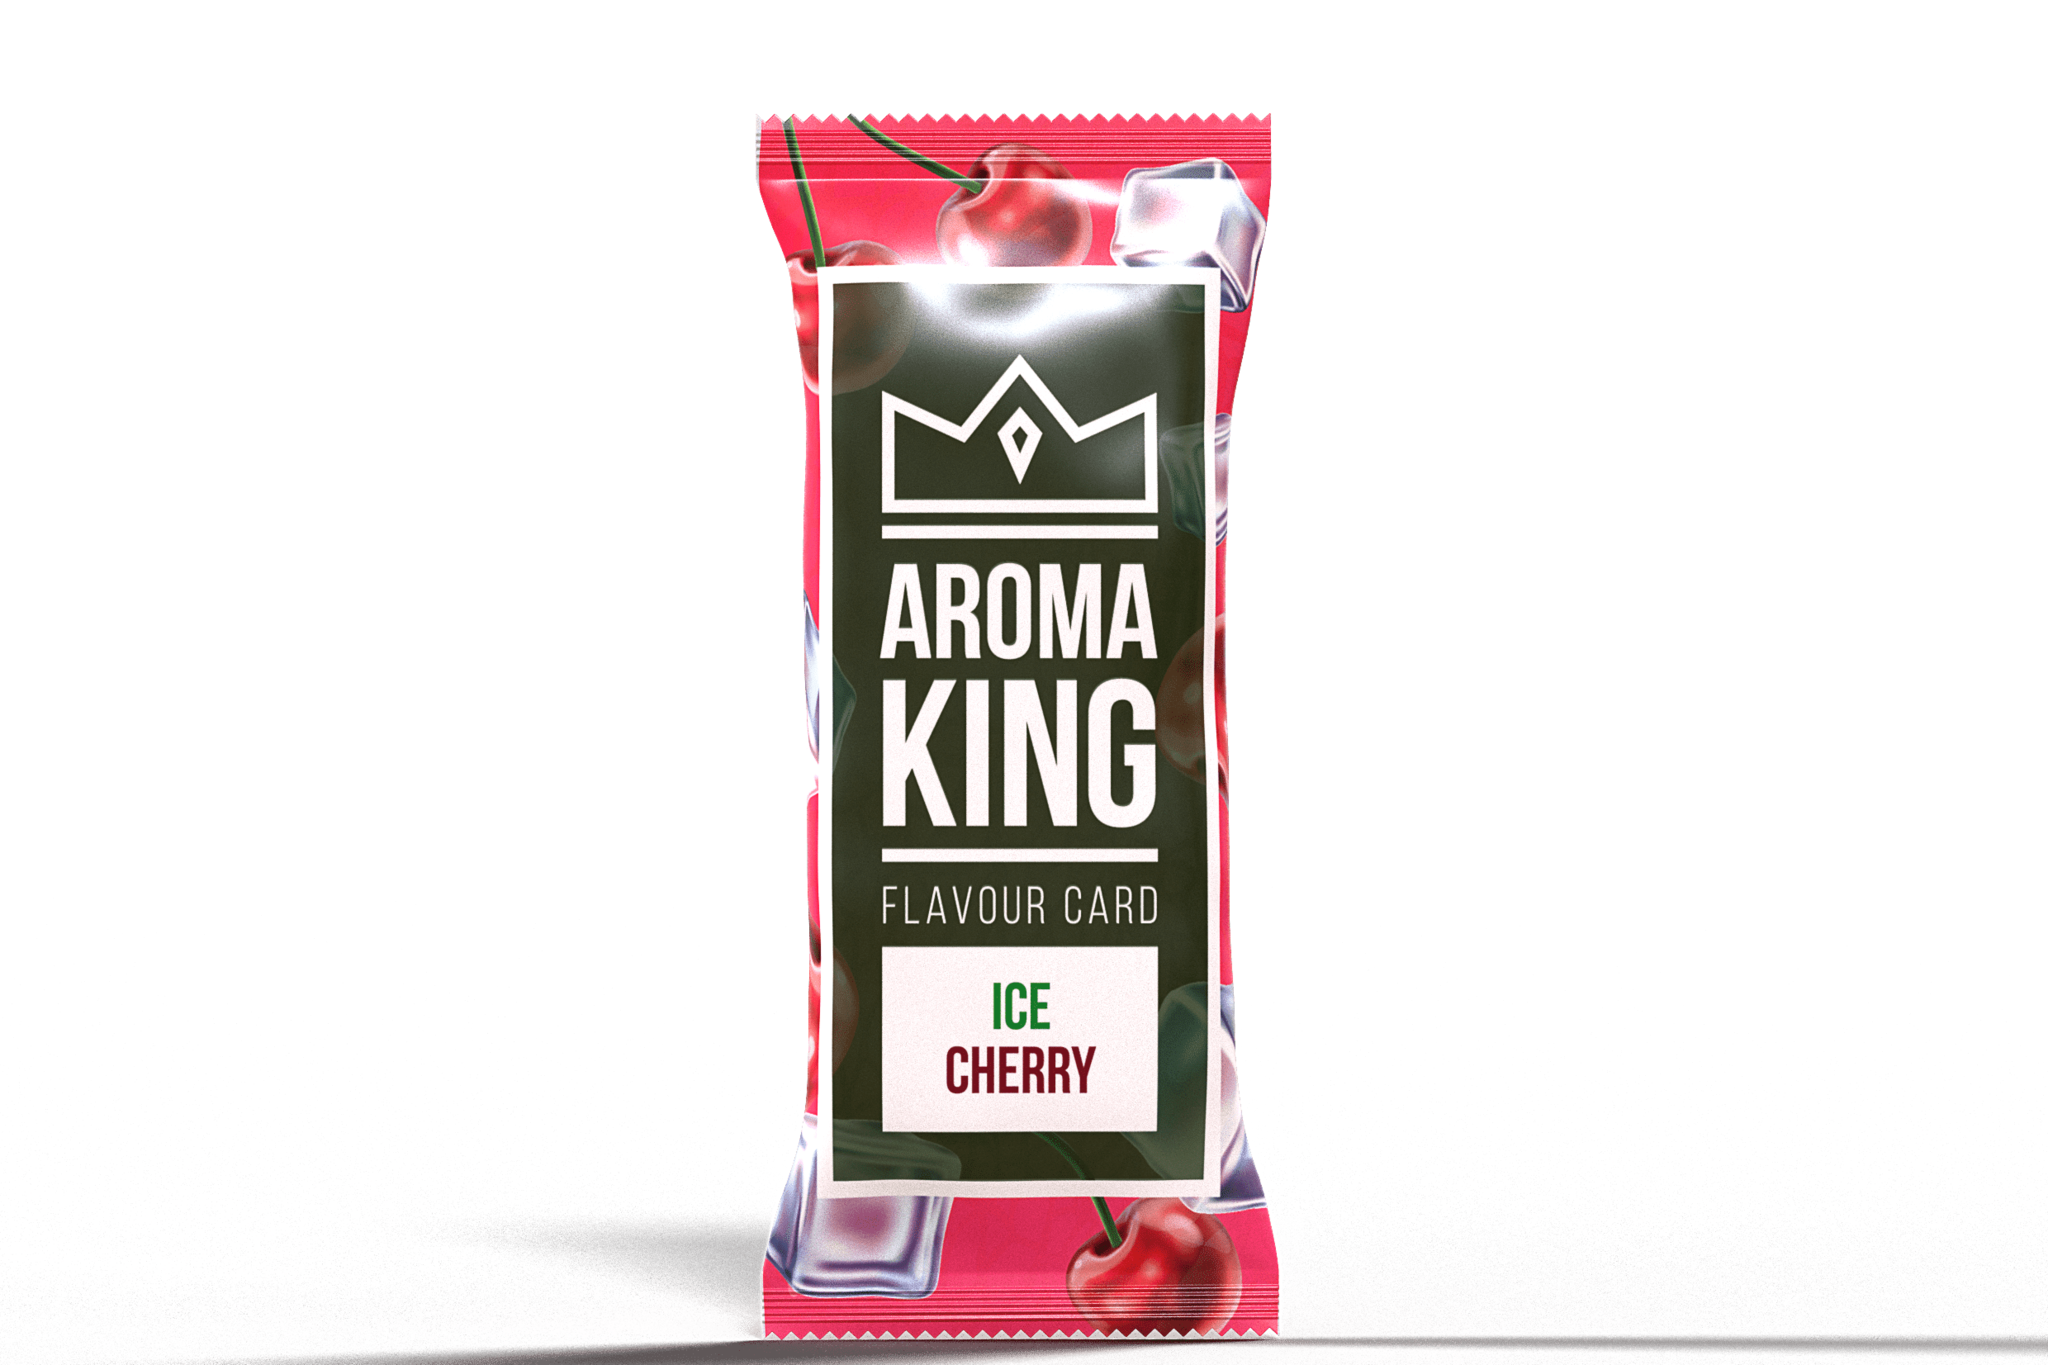 Aroma King Flavour Card Ice Cherry